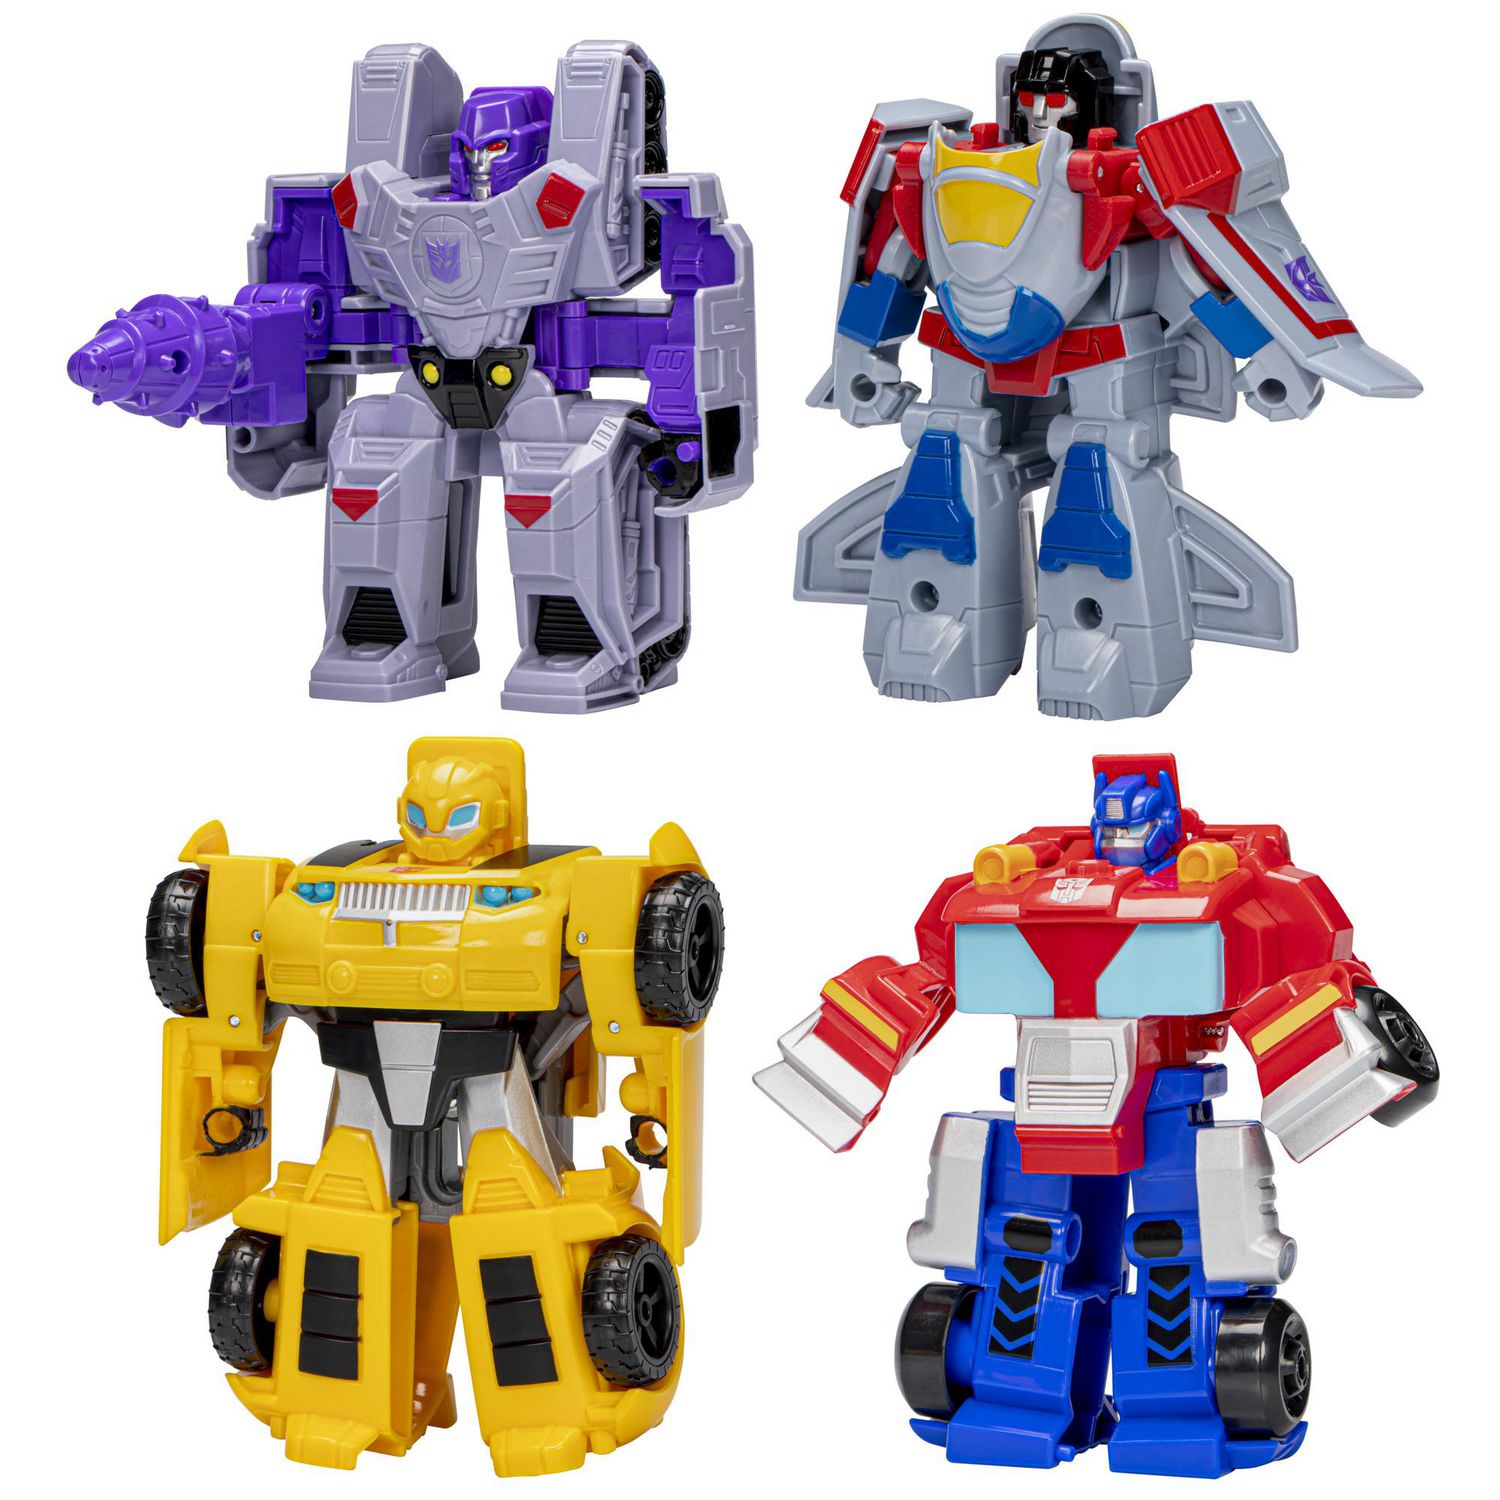 Transformers Toys Heroes vs Villains 4-Pack, 4.5 Inch Action